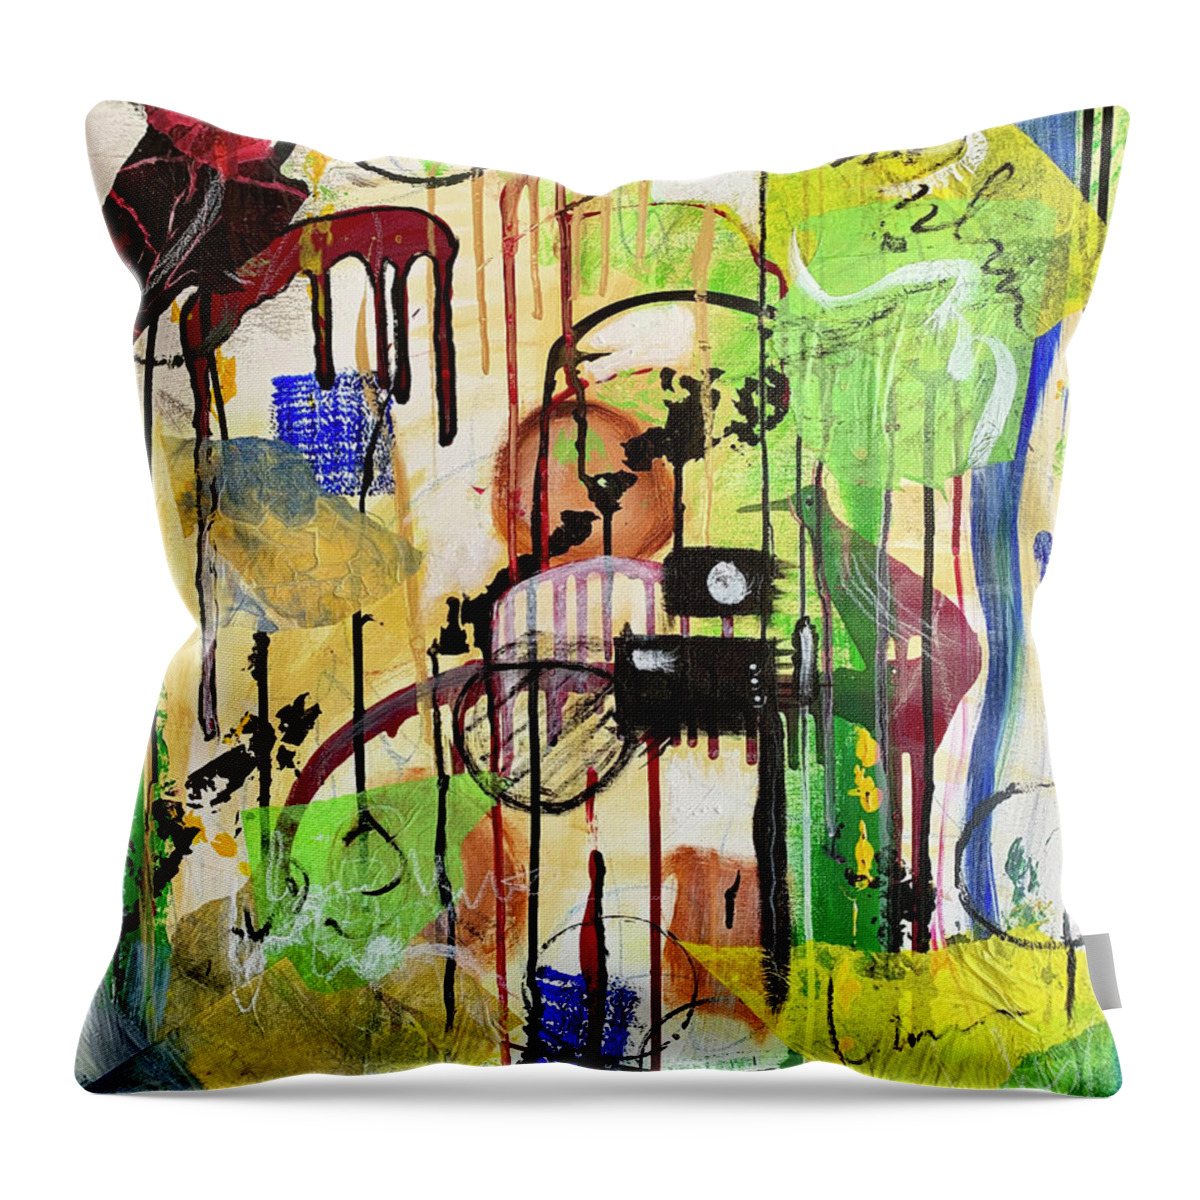 Abstract Throw Pillow featuring the mixed media Birds by Laura Jaffe